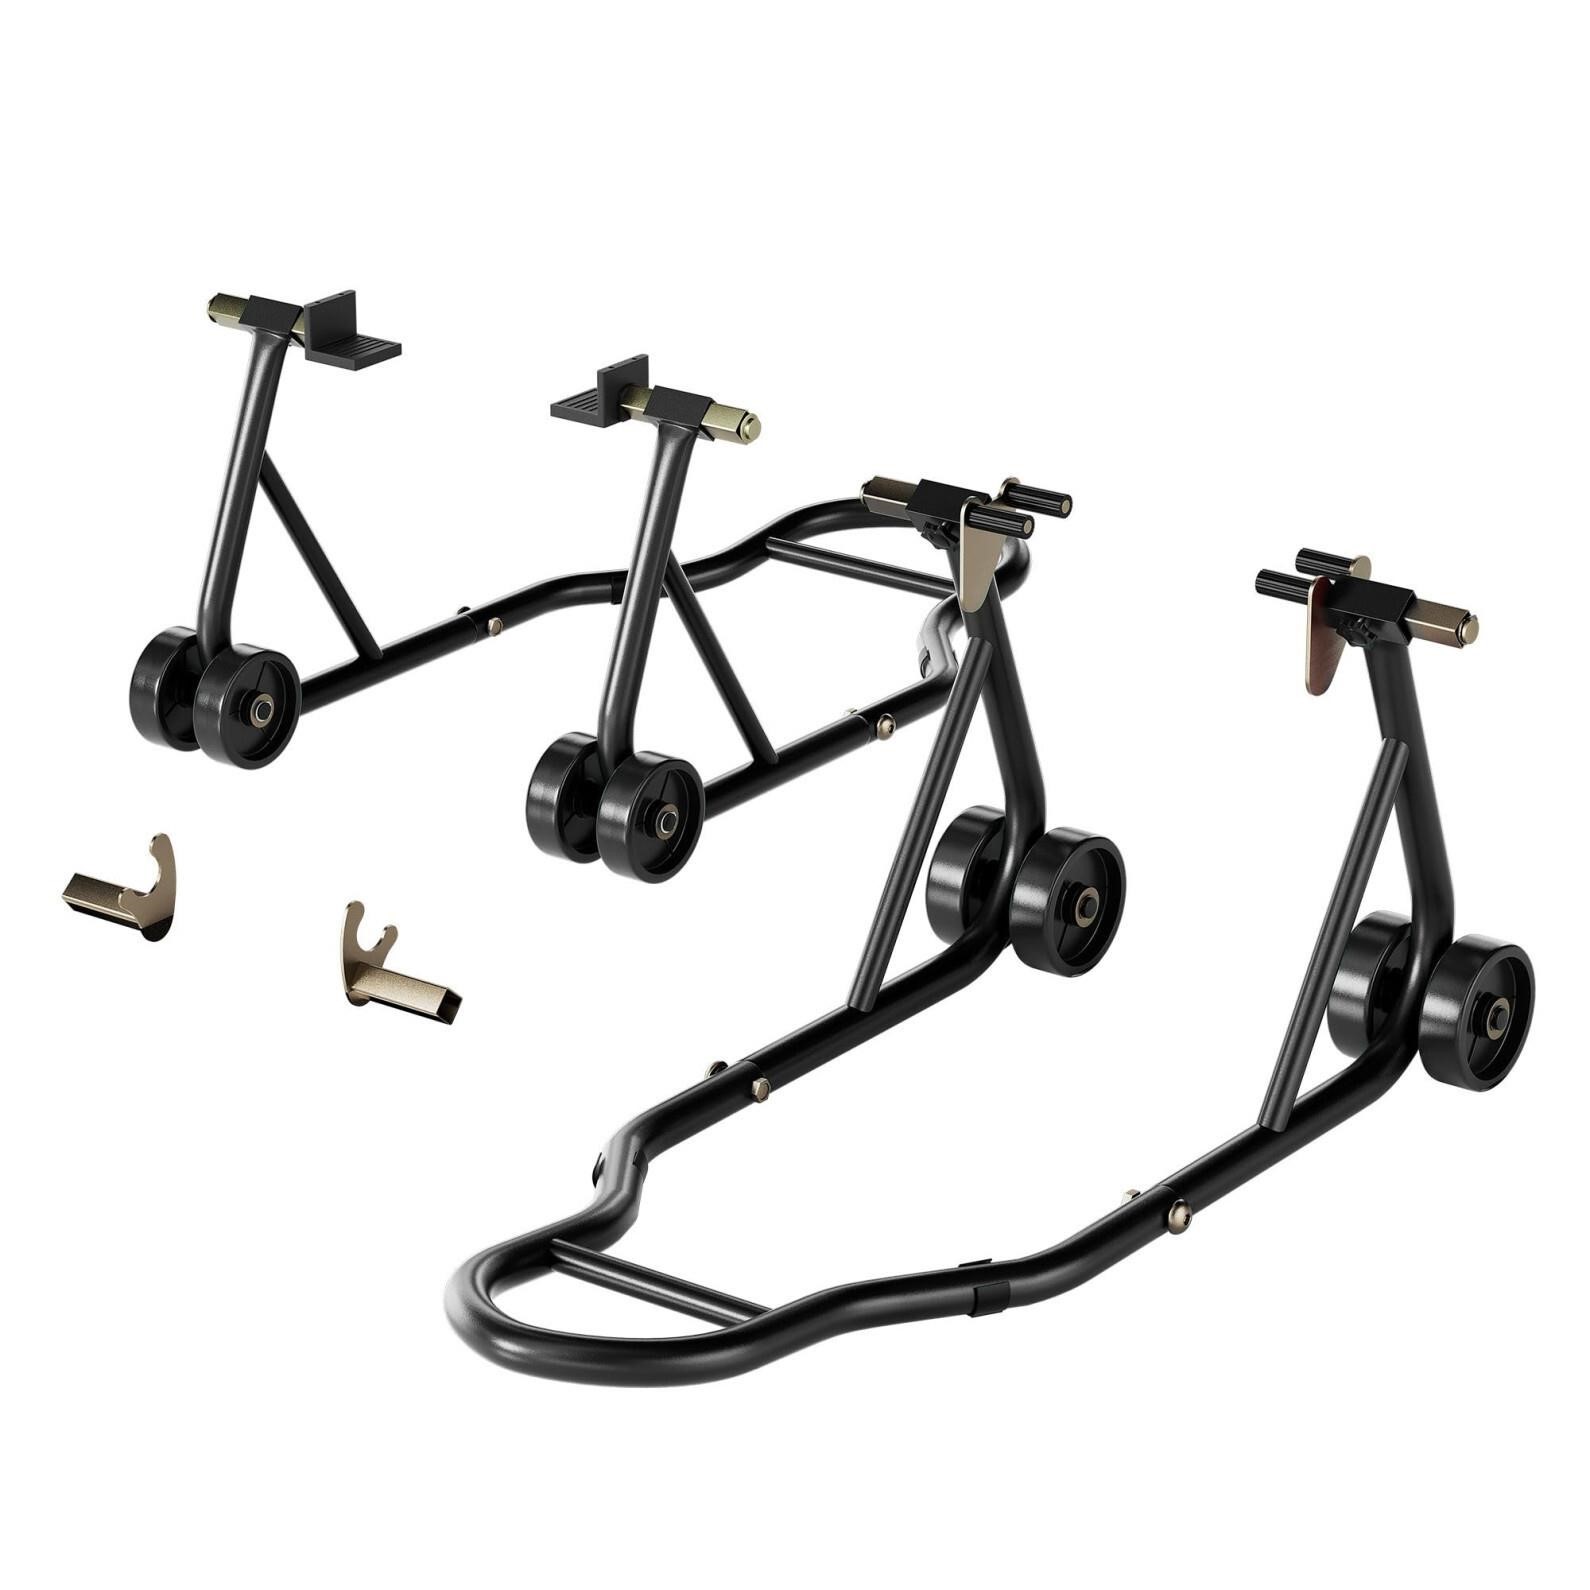 SPECSTAR Motorcycle Stands, 882 Lbs Capacity Front